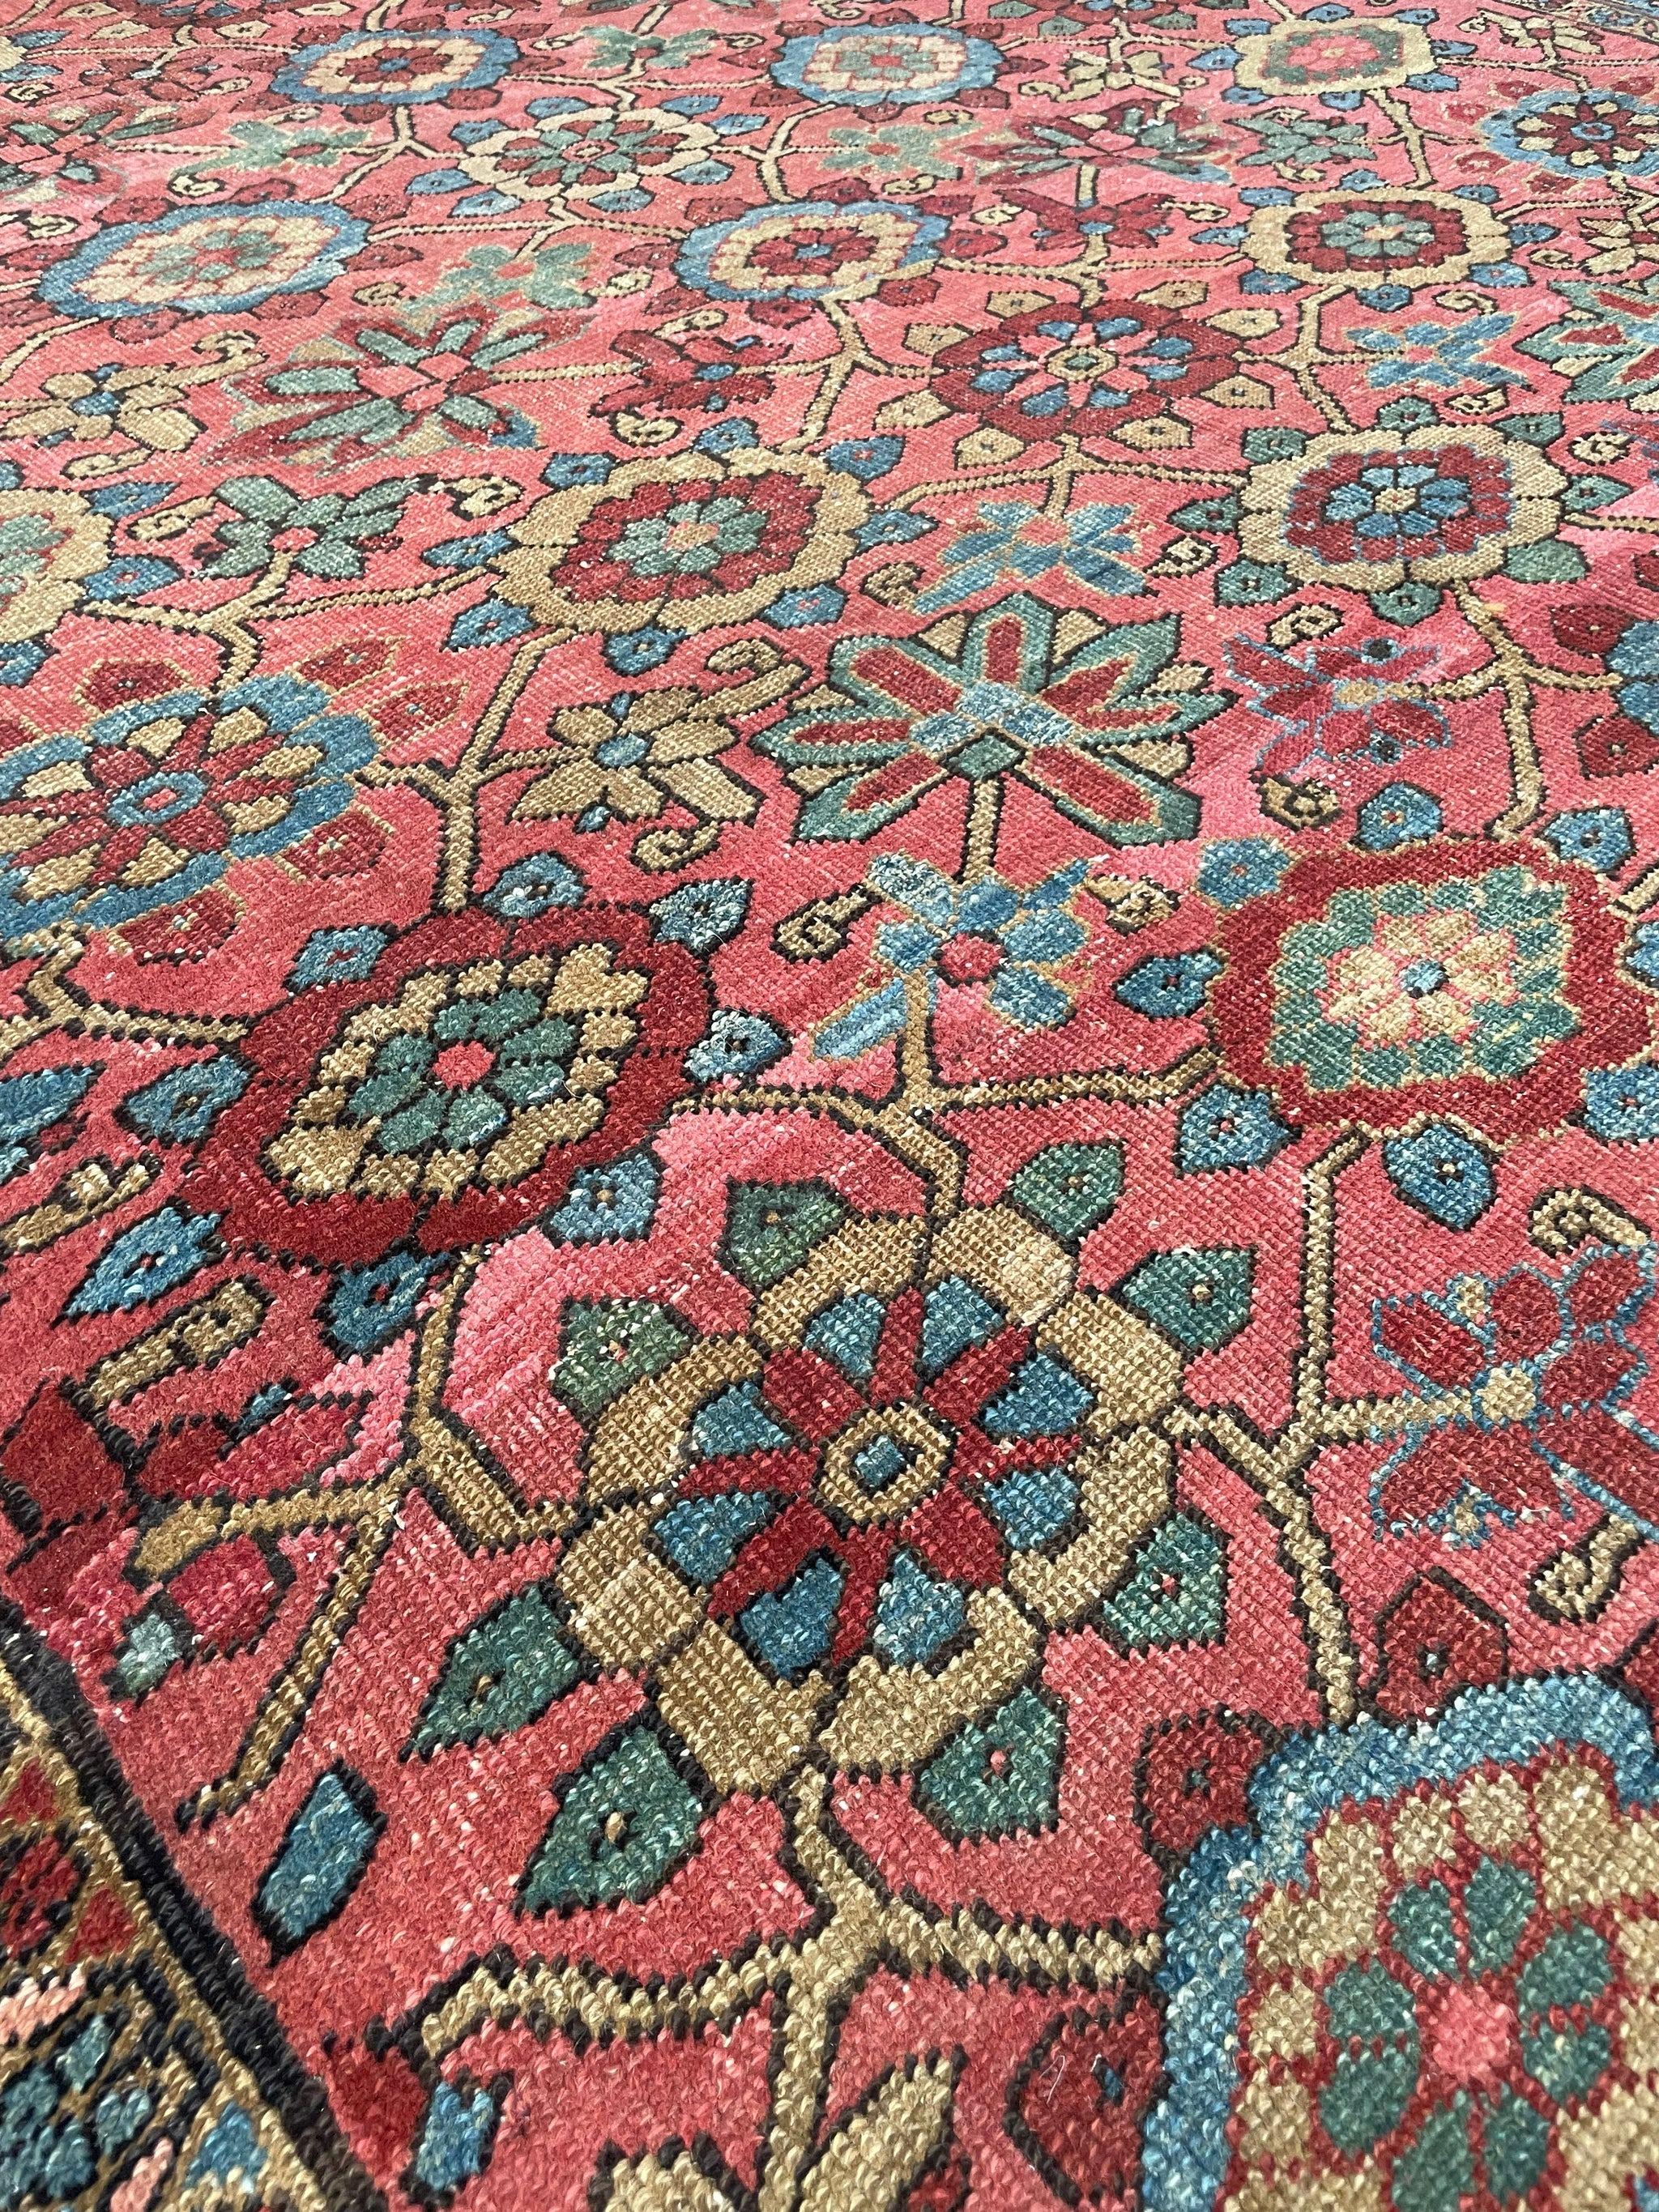 Magnificent antique Persian Heriz with Rare Mina-Khani design glowing pink, bakshayesh blue, camel, green

About: Beyond unique in size, colors, weave, condition, and design - this piece is a showstopper. Glowing pinks surrounded by bakshaeysh ice